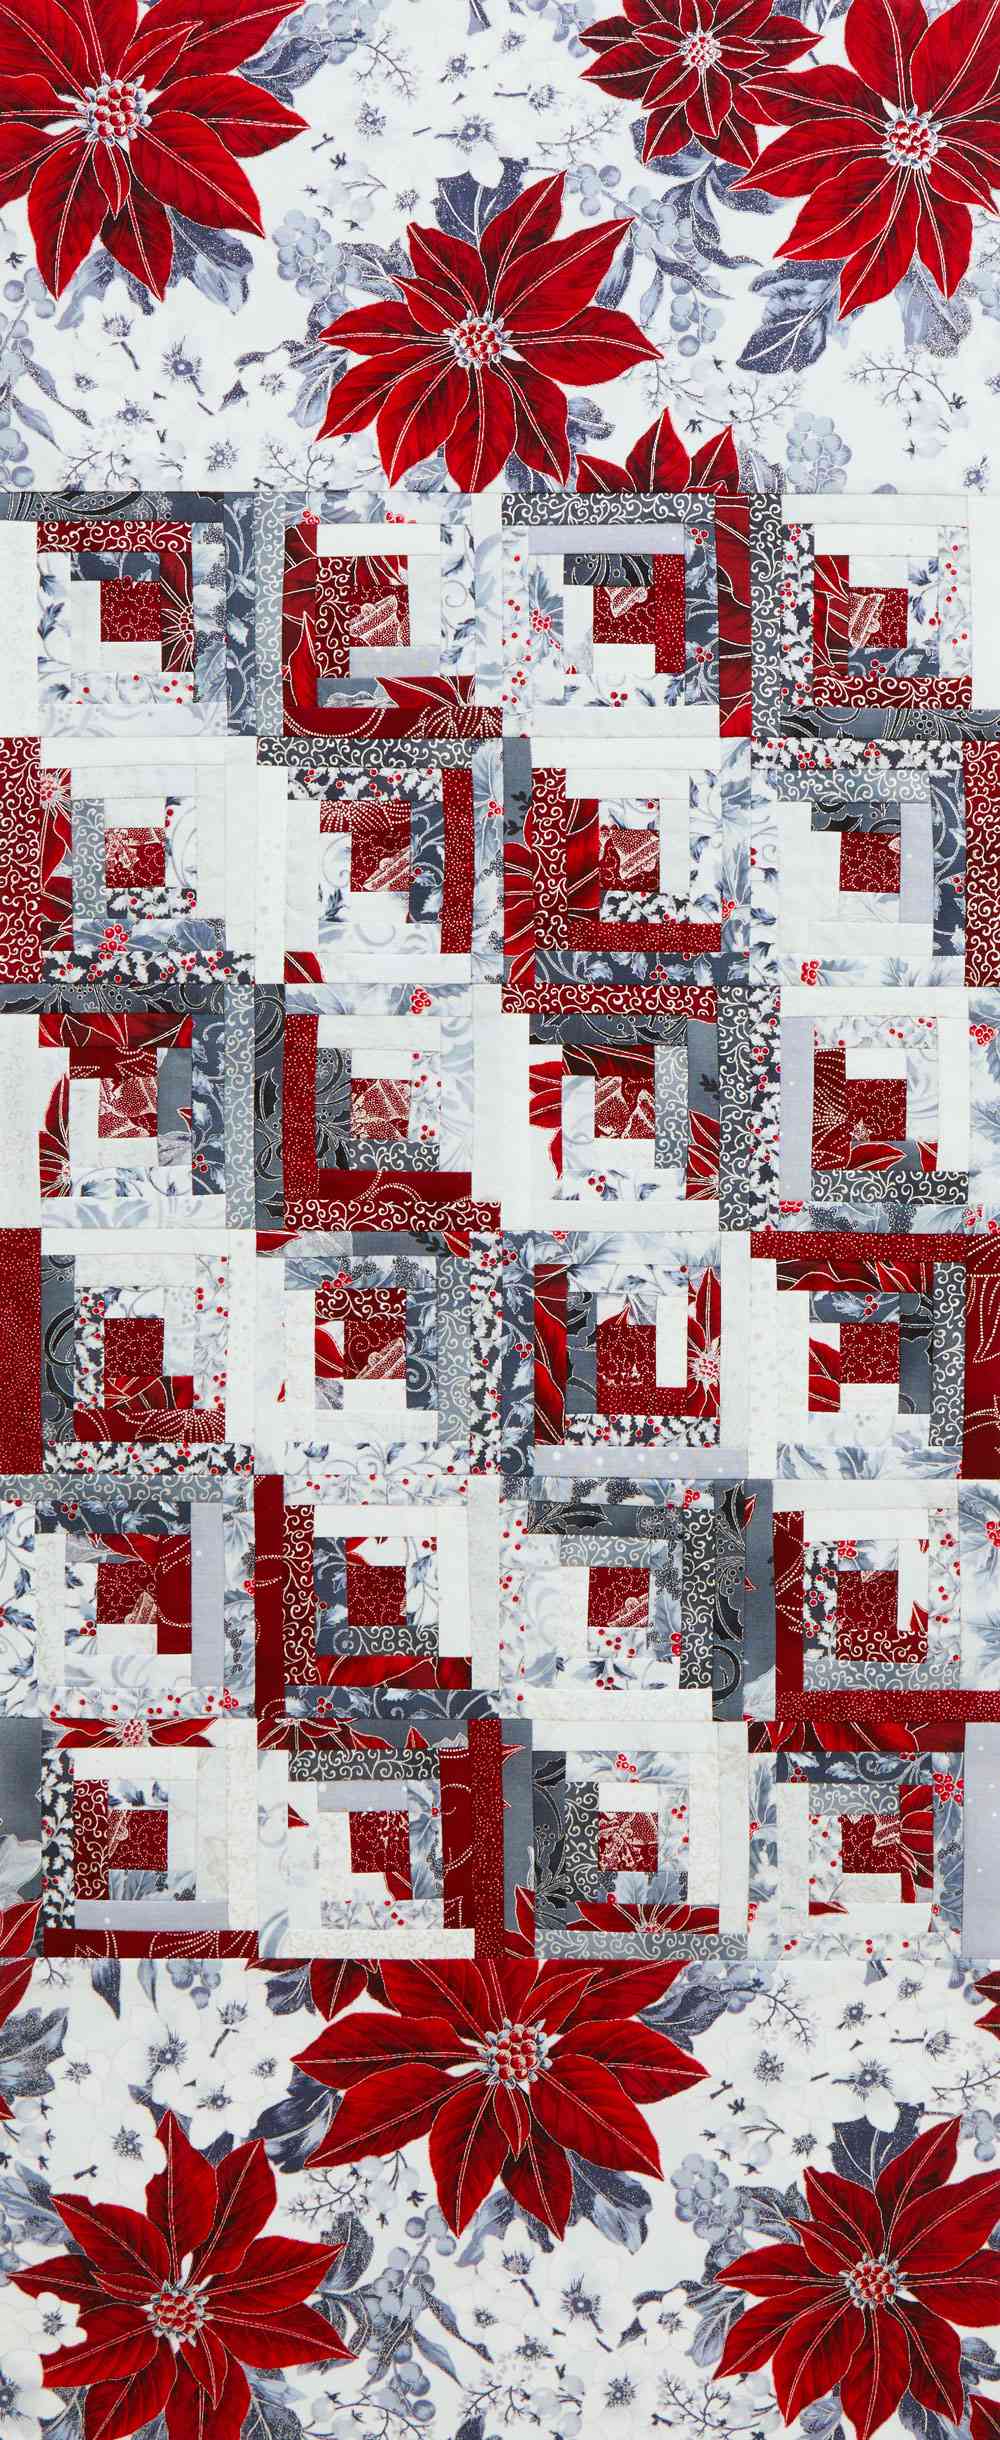 Cabin Flurries INSTANT DOWNLOAD Julie Wurzer for PatchAbilities Table Runner